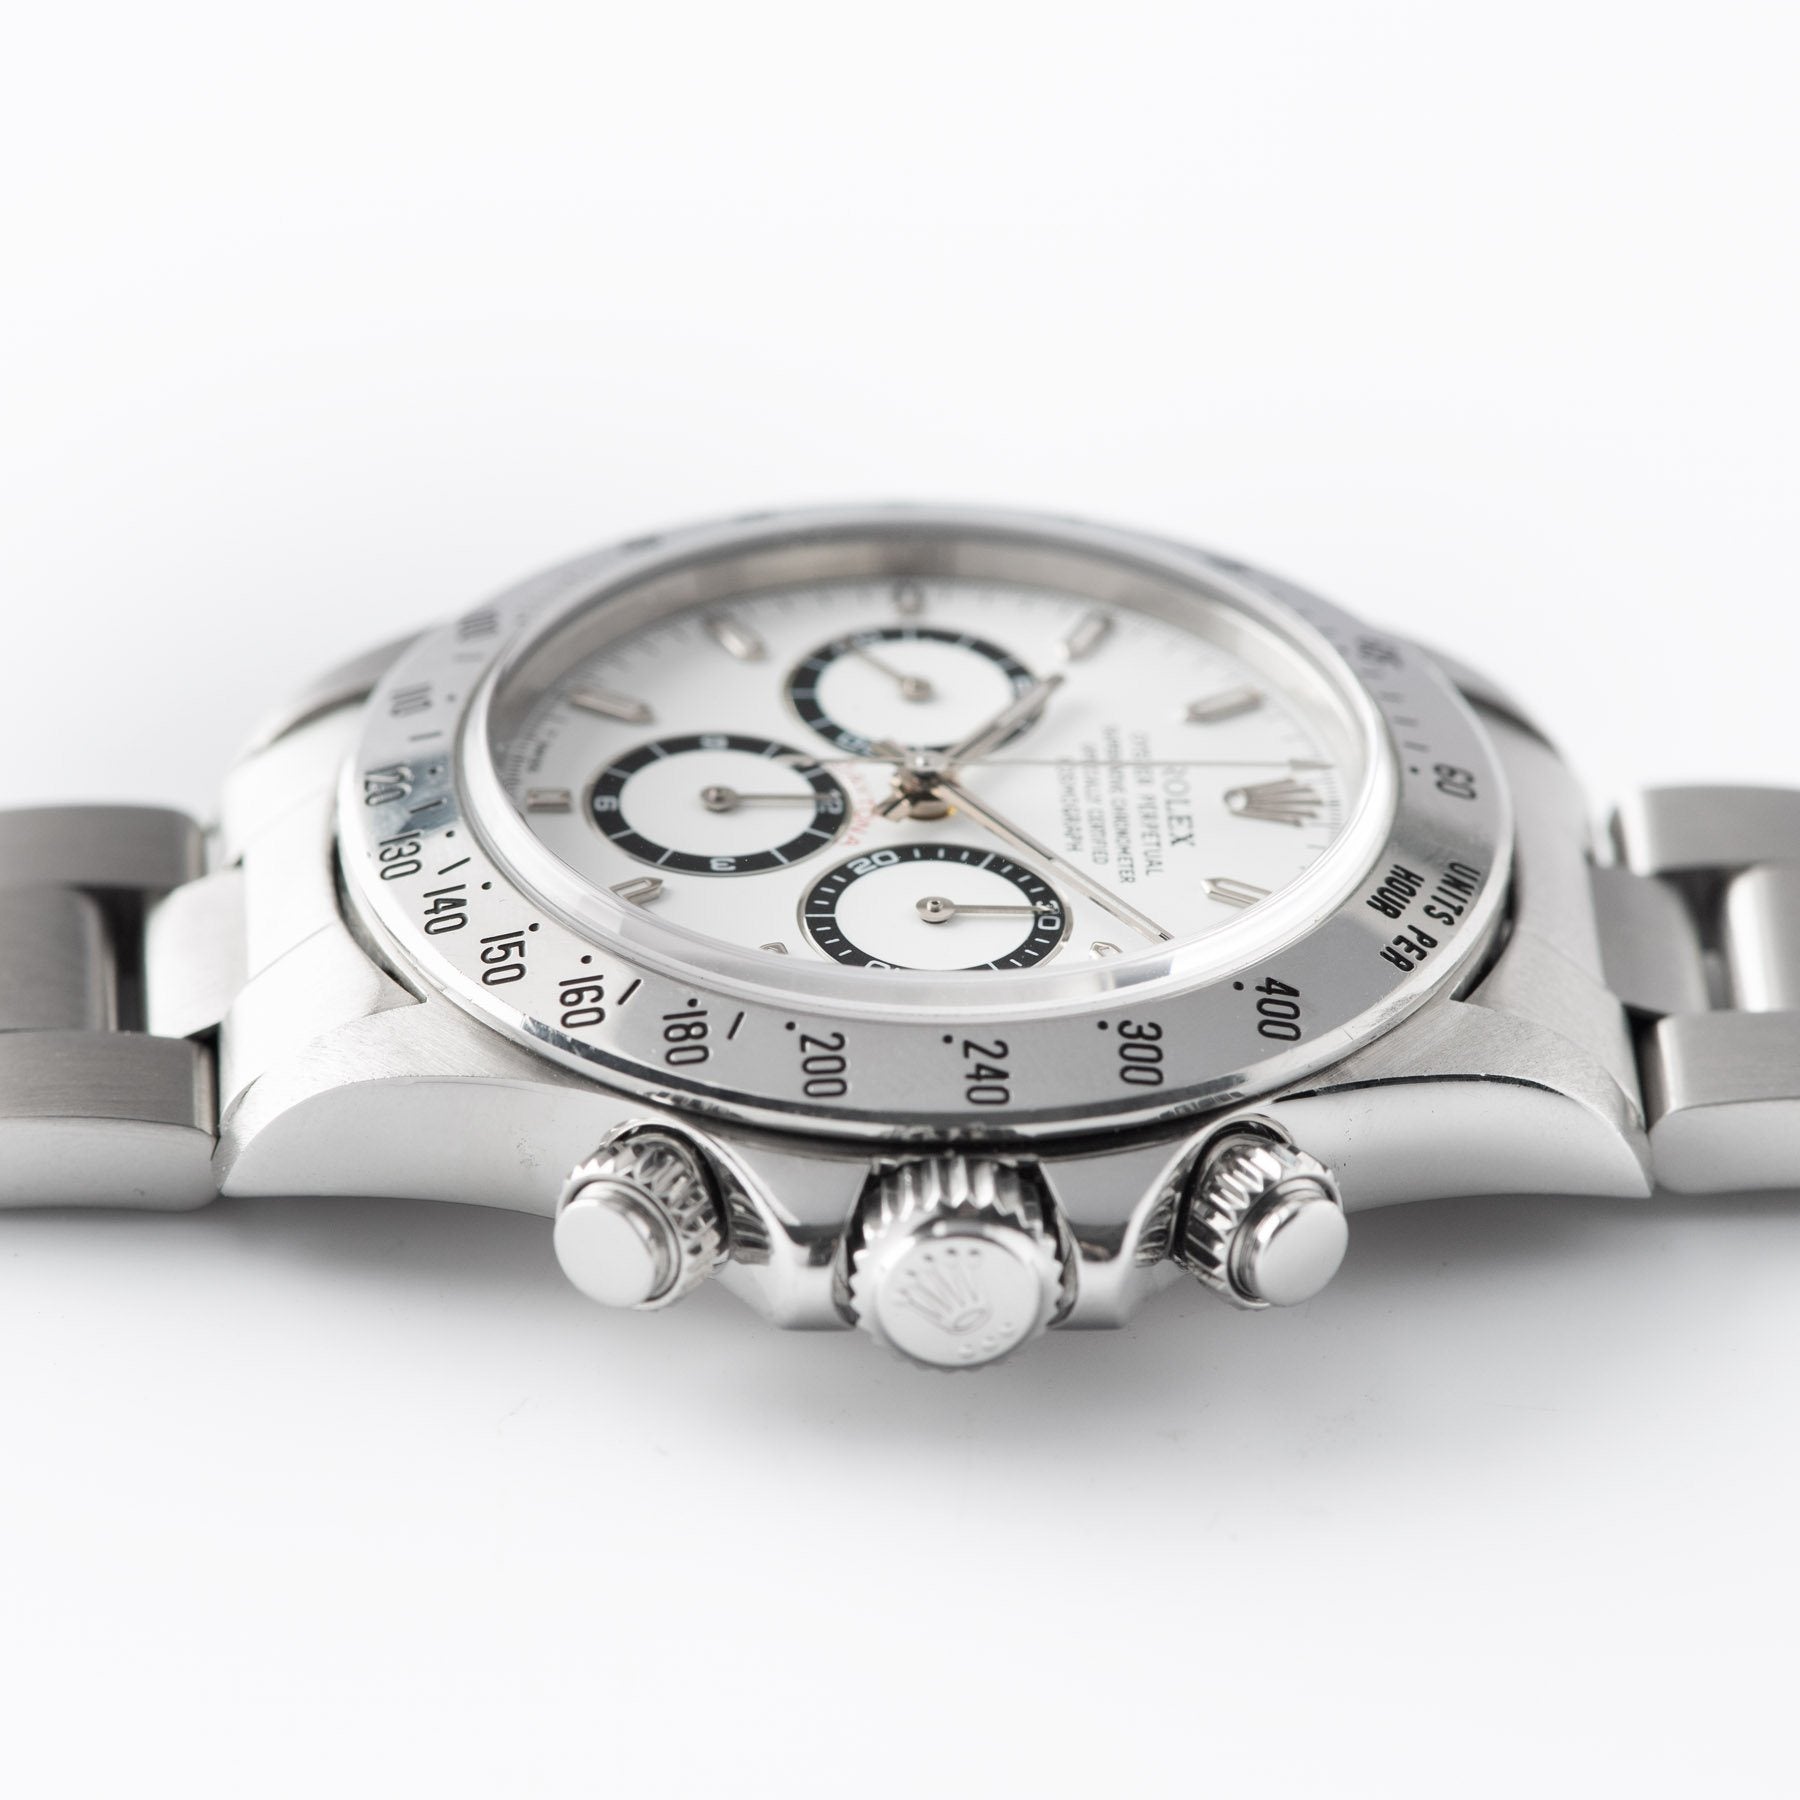 Rolex Daytona Steel 16520 White Dial with a Zenith movement